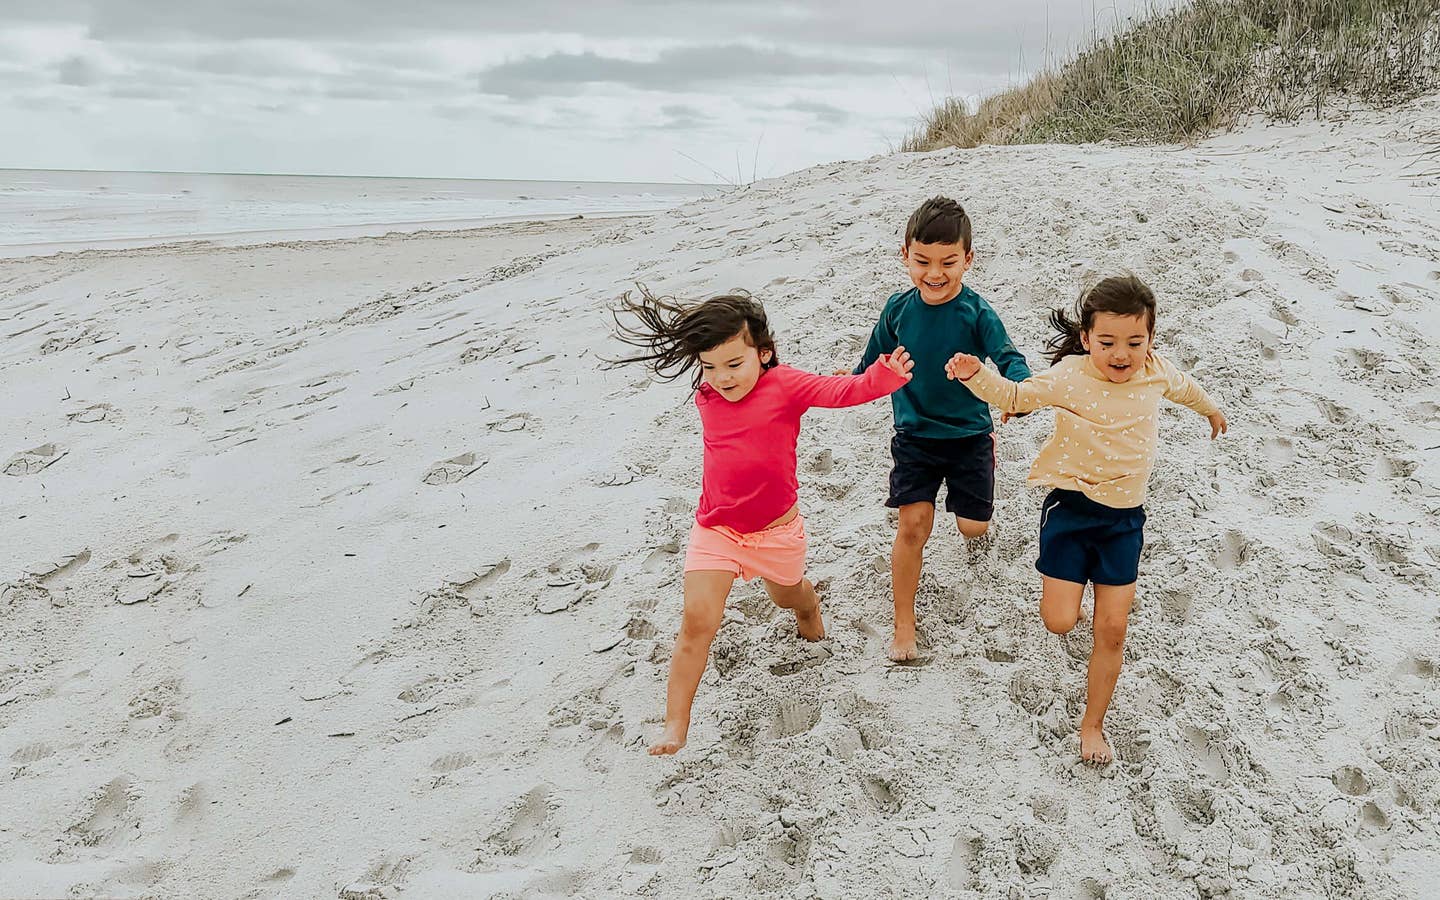 Three toddlers in multi-colored rash guards and board shorts run on a sandy beach.